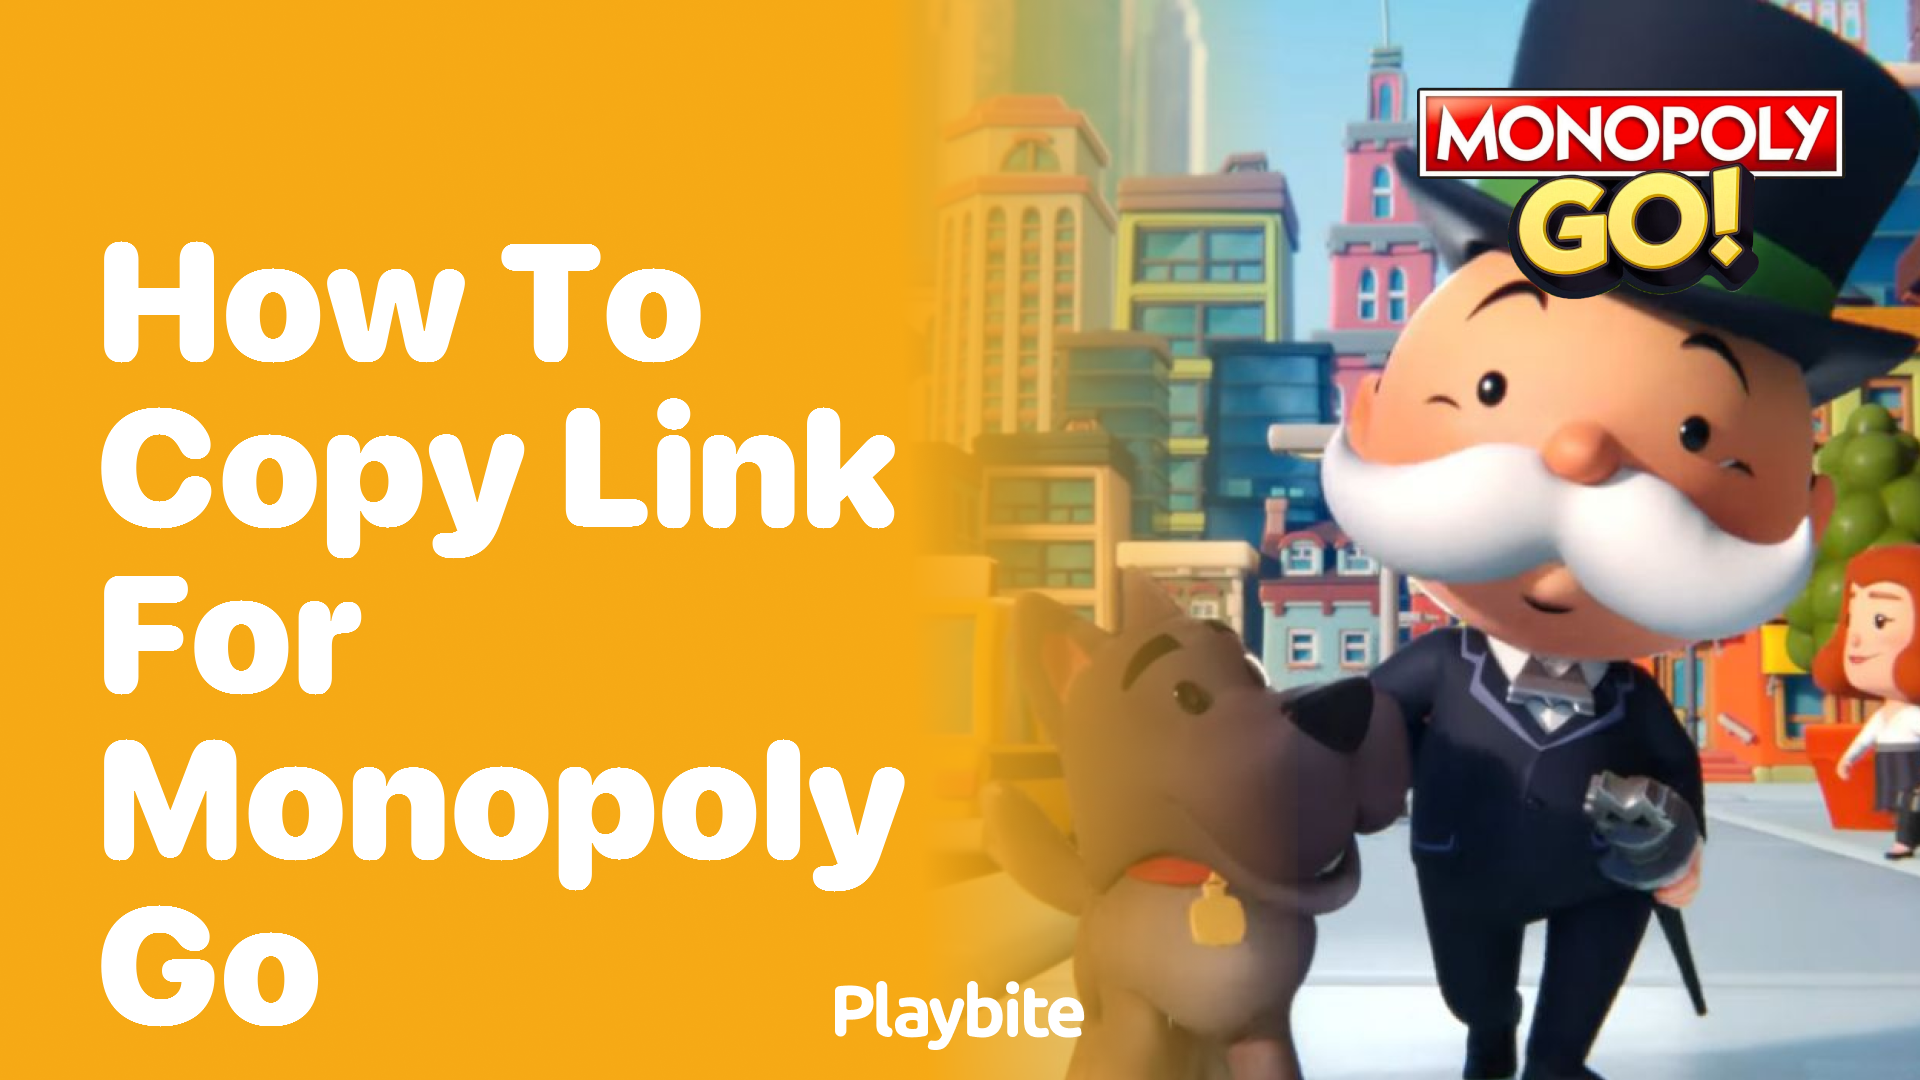 How to Copy Link for Monopoly Go: A Simple Guide